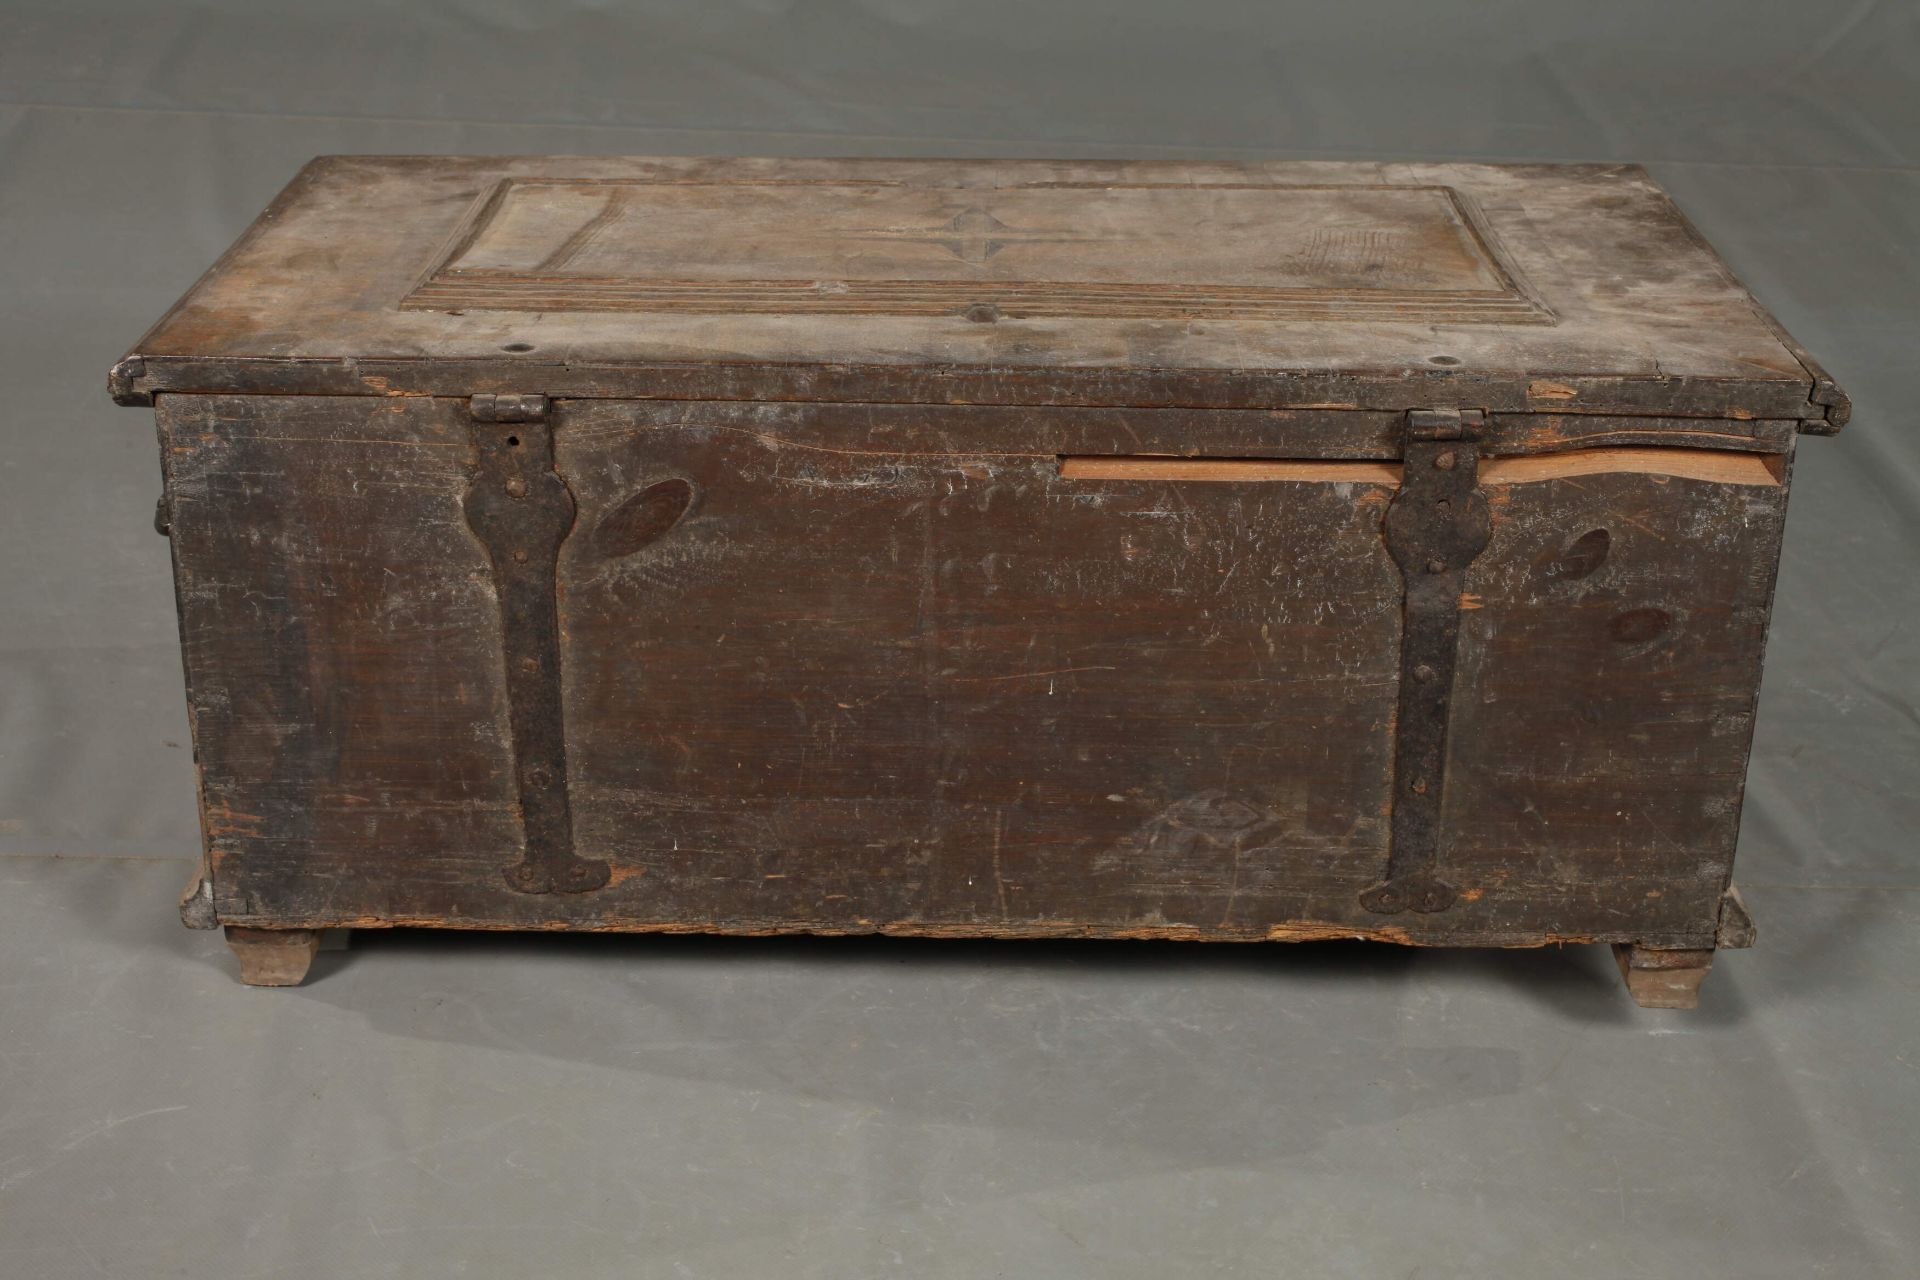 Inguild chest of the bakers' guild - Image 7 of 8